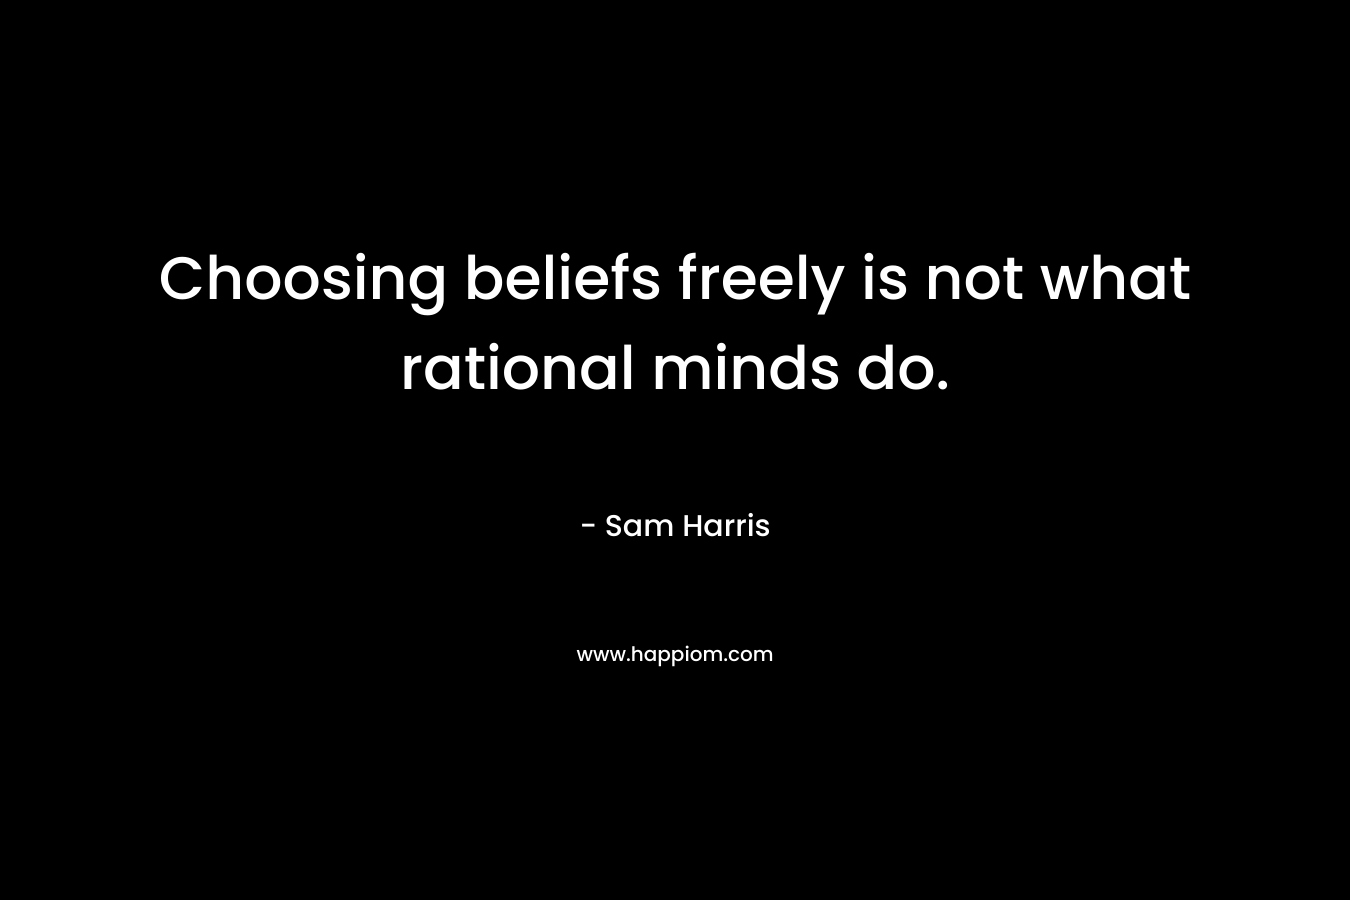 Choosing beliefs freely is not what rational minds do.